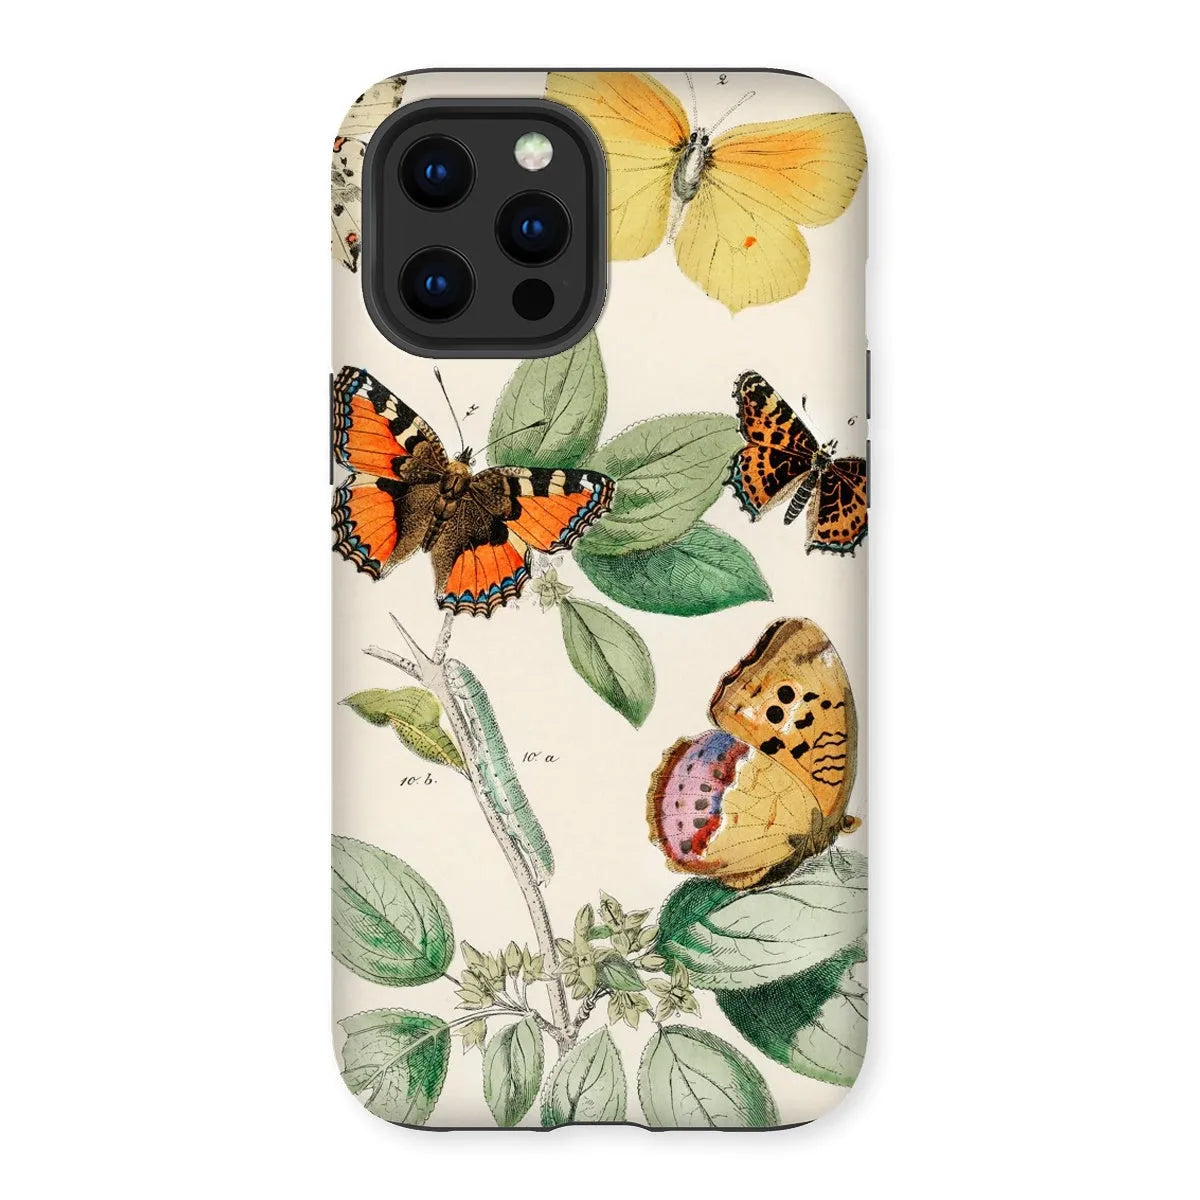 Butterfly Aesthetic Art Phone Case - William Forsell Kirby - Iphone 12 Pro Max / Matte - Mobile Phone Cases - Aesthetic